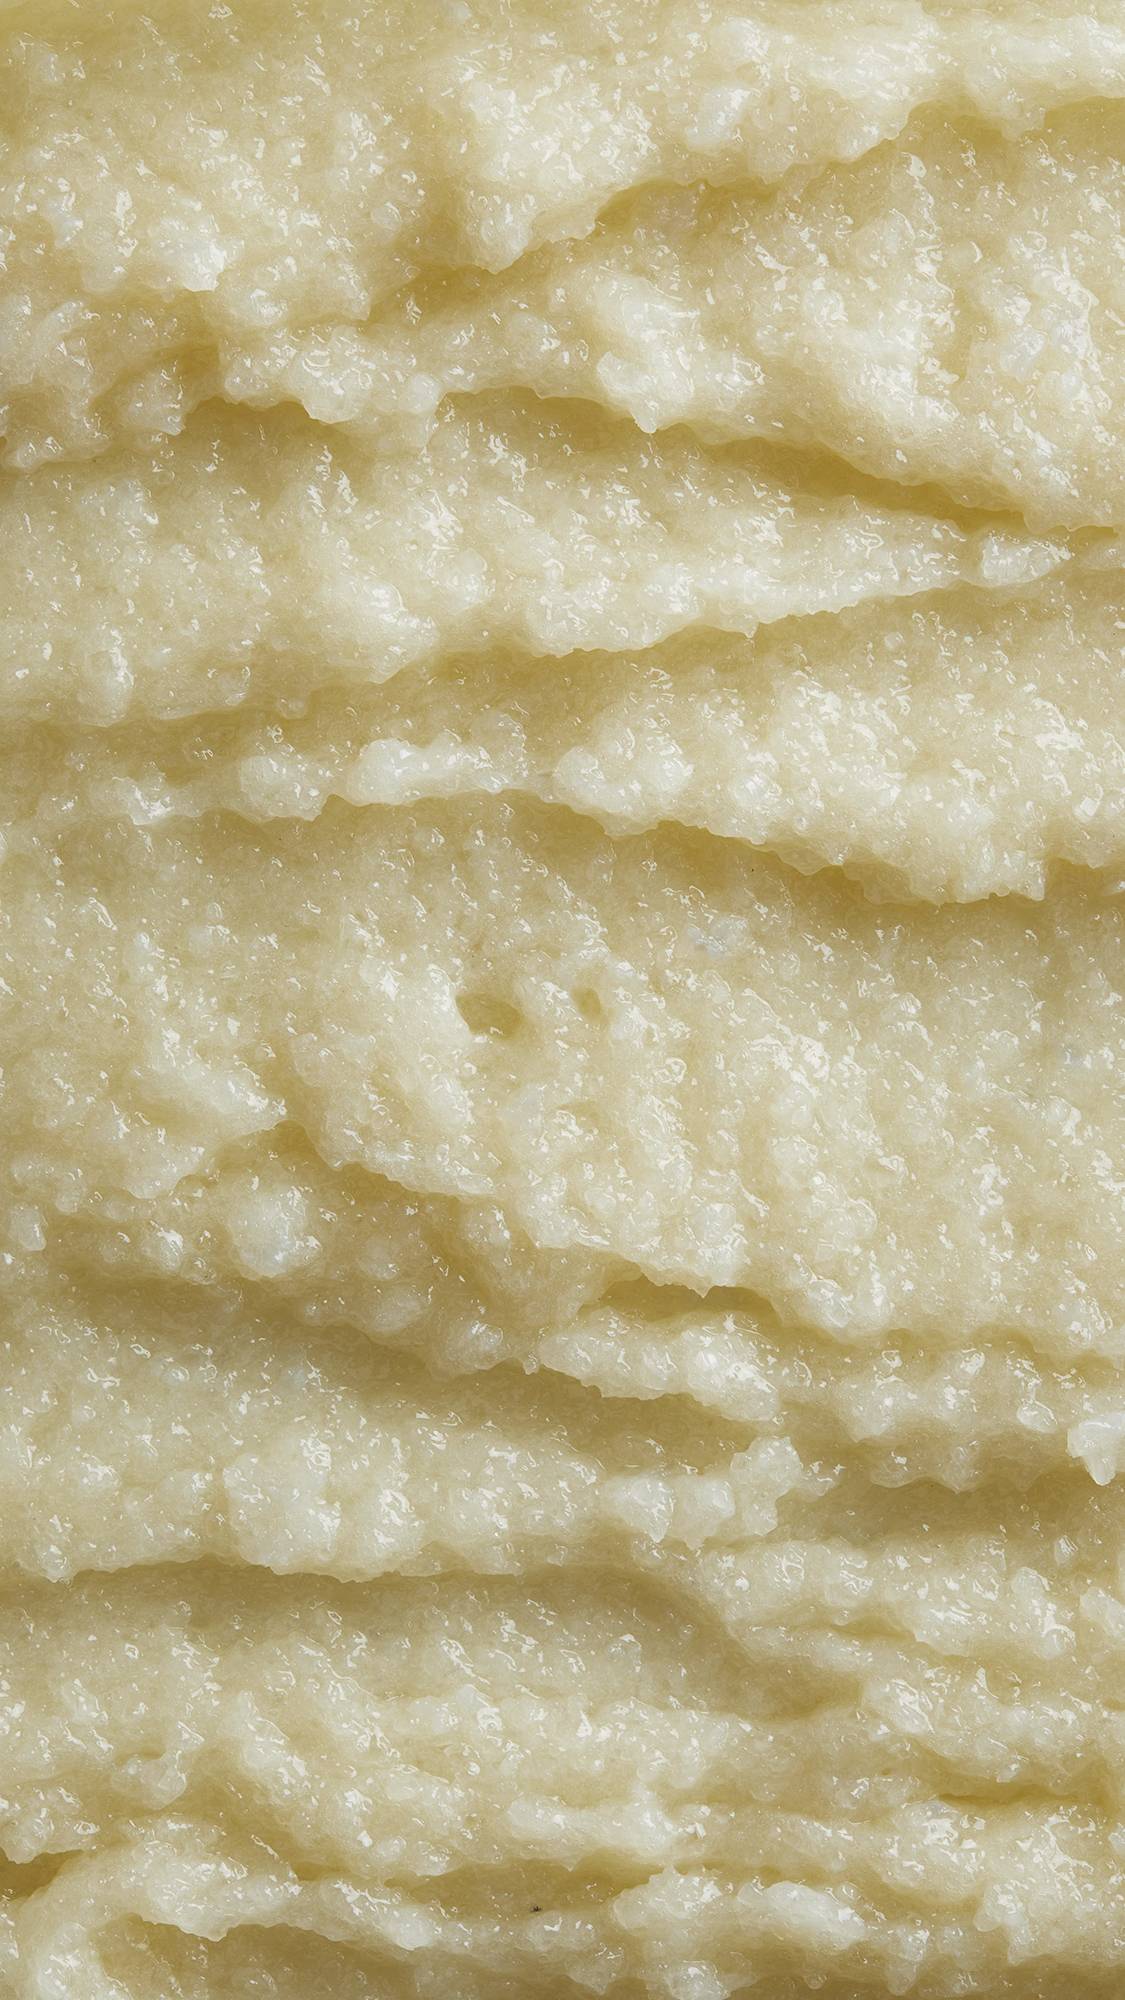 Image is a very defined close-up of the thick, exfoliating shampoo showing almost batter-like folds.